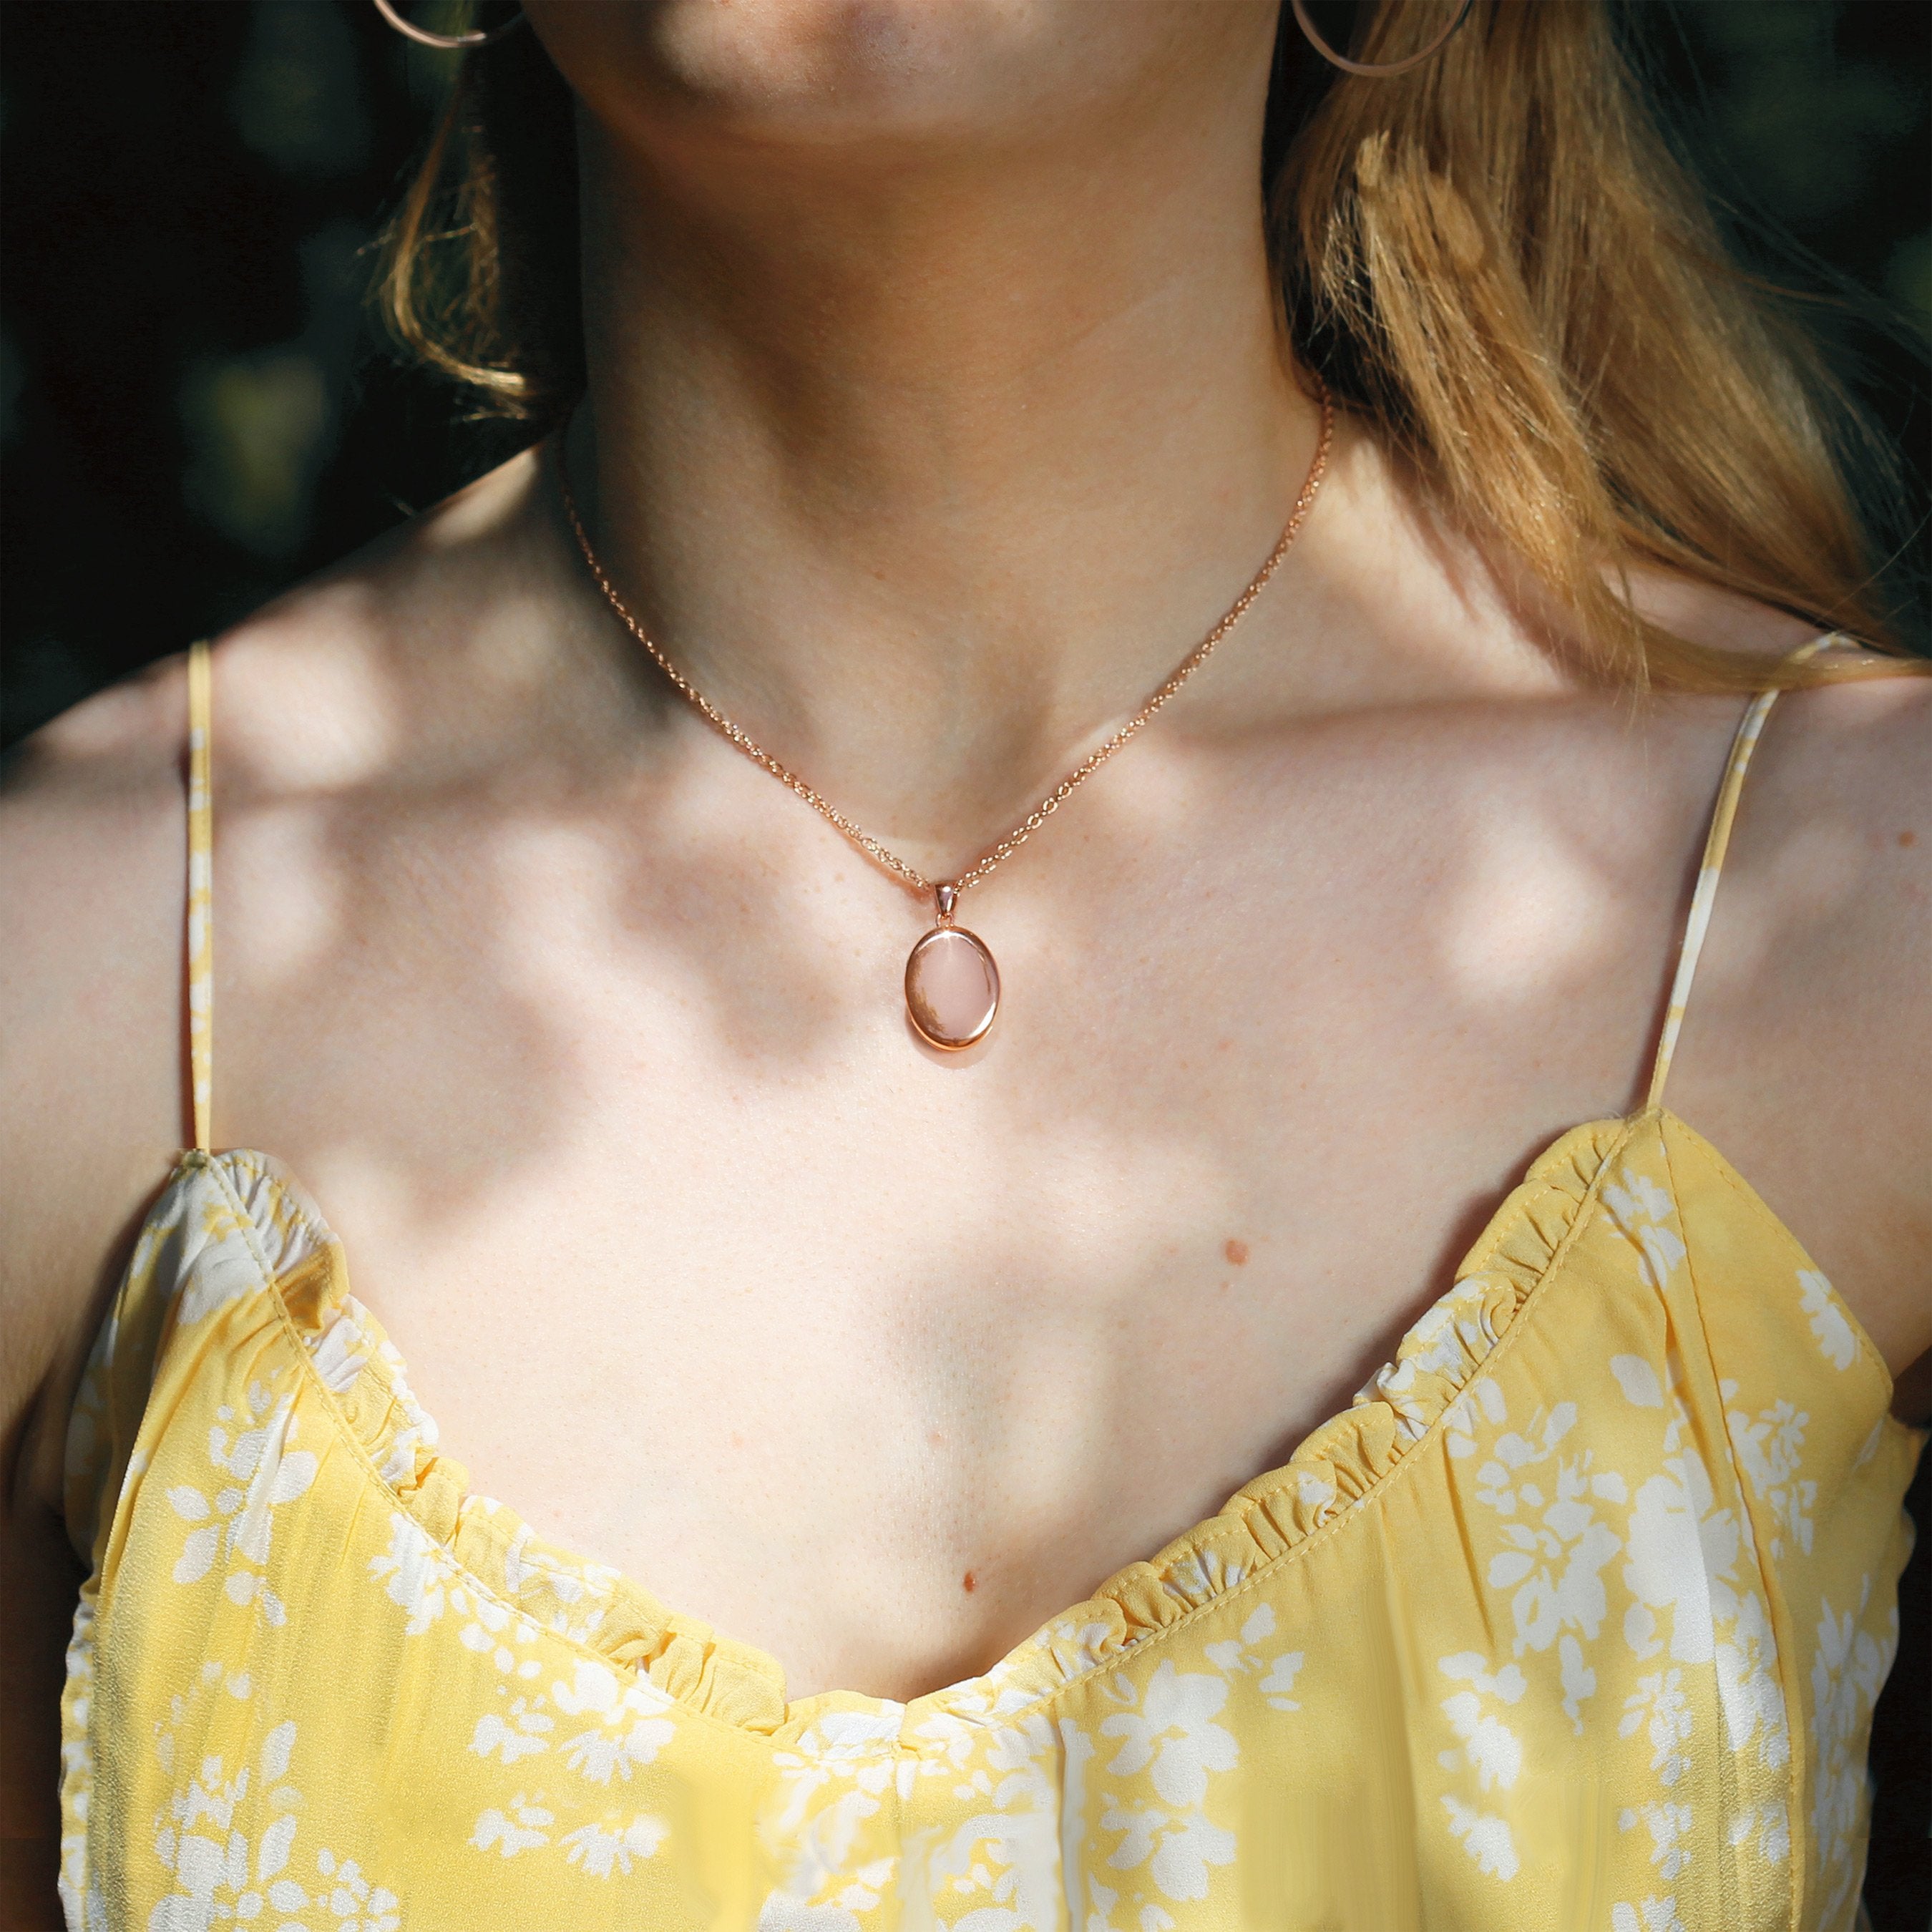 Model wearing a 9 ct rose gold oval locket with a 9 ct rose gold curb chain.